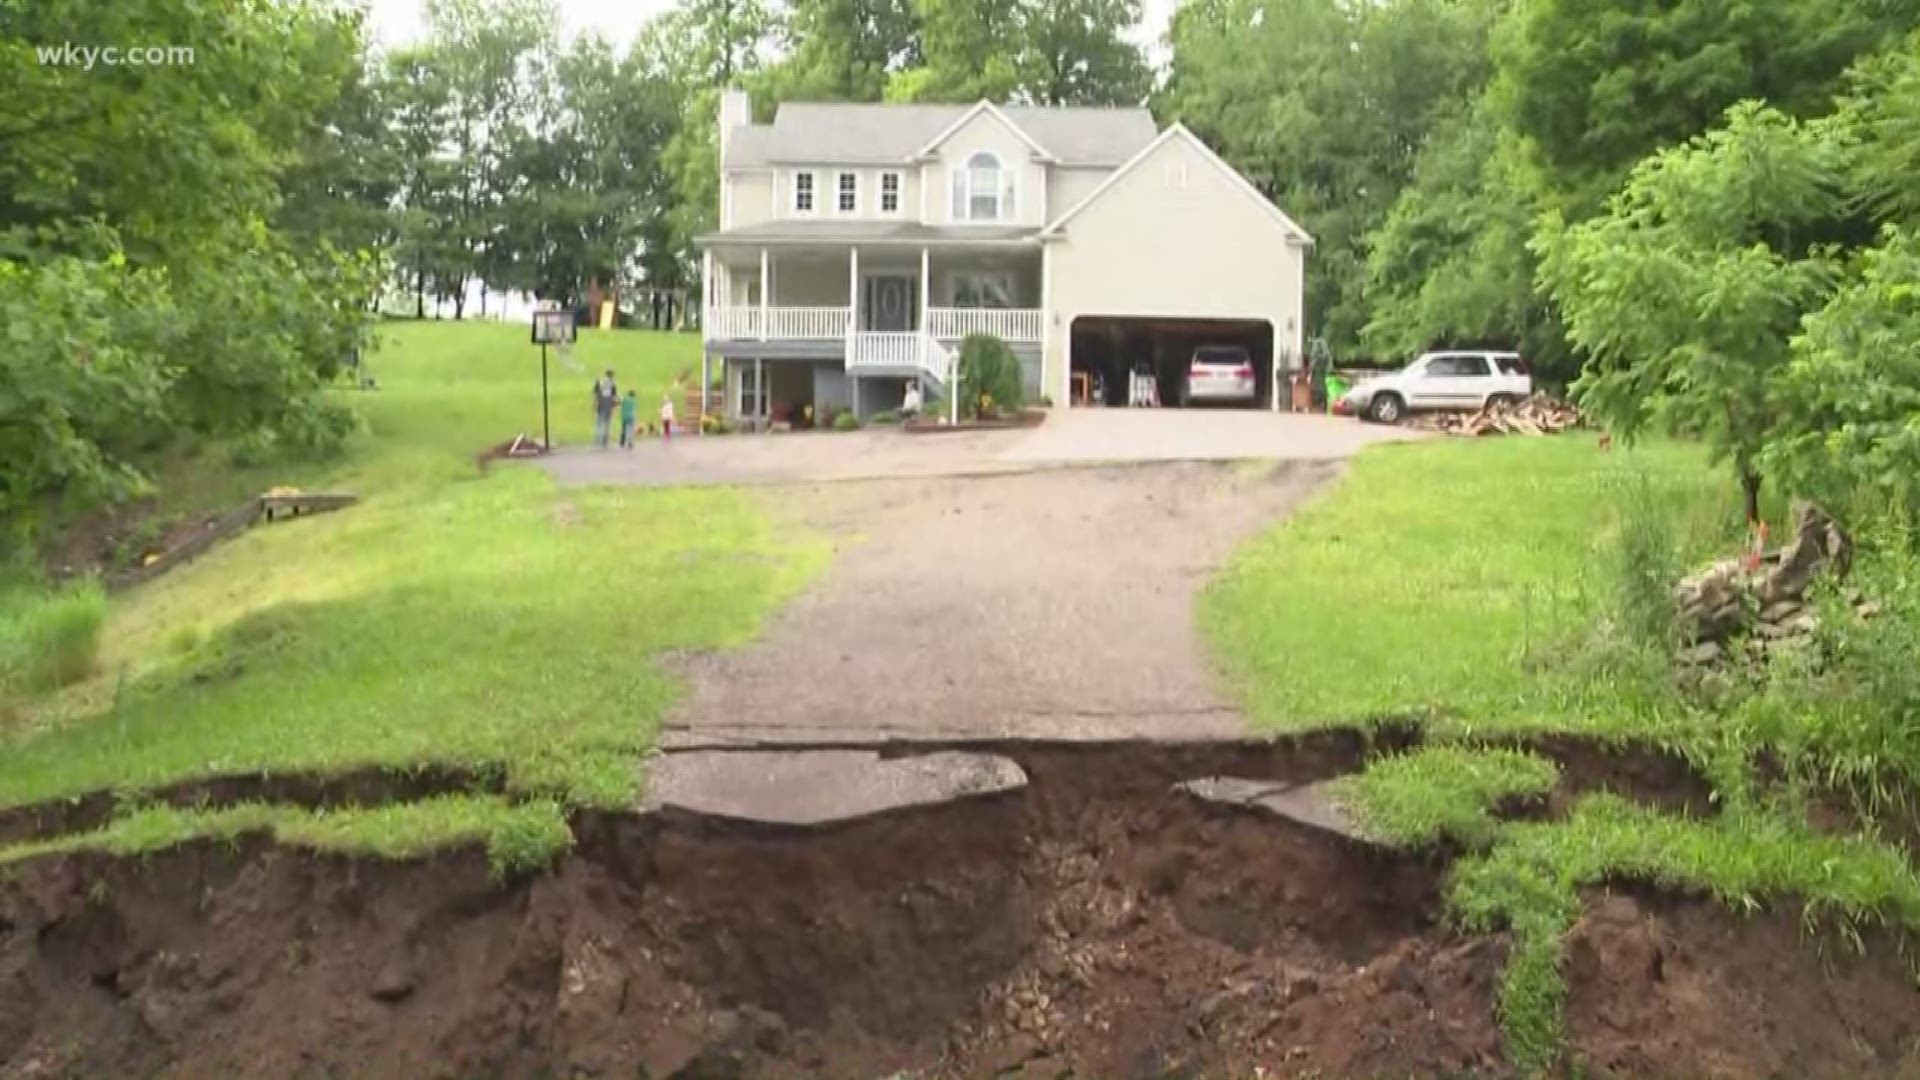 June 19, 2019: The images are unbelievable. Where their driveway once connected to Nimisila Road, a family’s property in Green now sits a small crater. That’s because a portion of the driveway crumbled and washed away amid the recent heavy rains and flash flood conditions that hit Northeast Ohio.